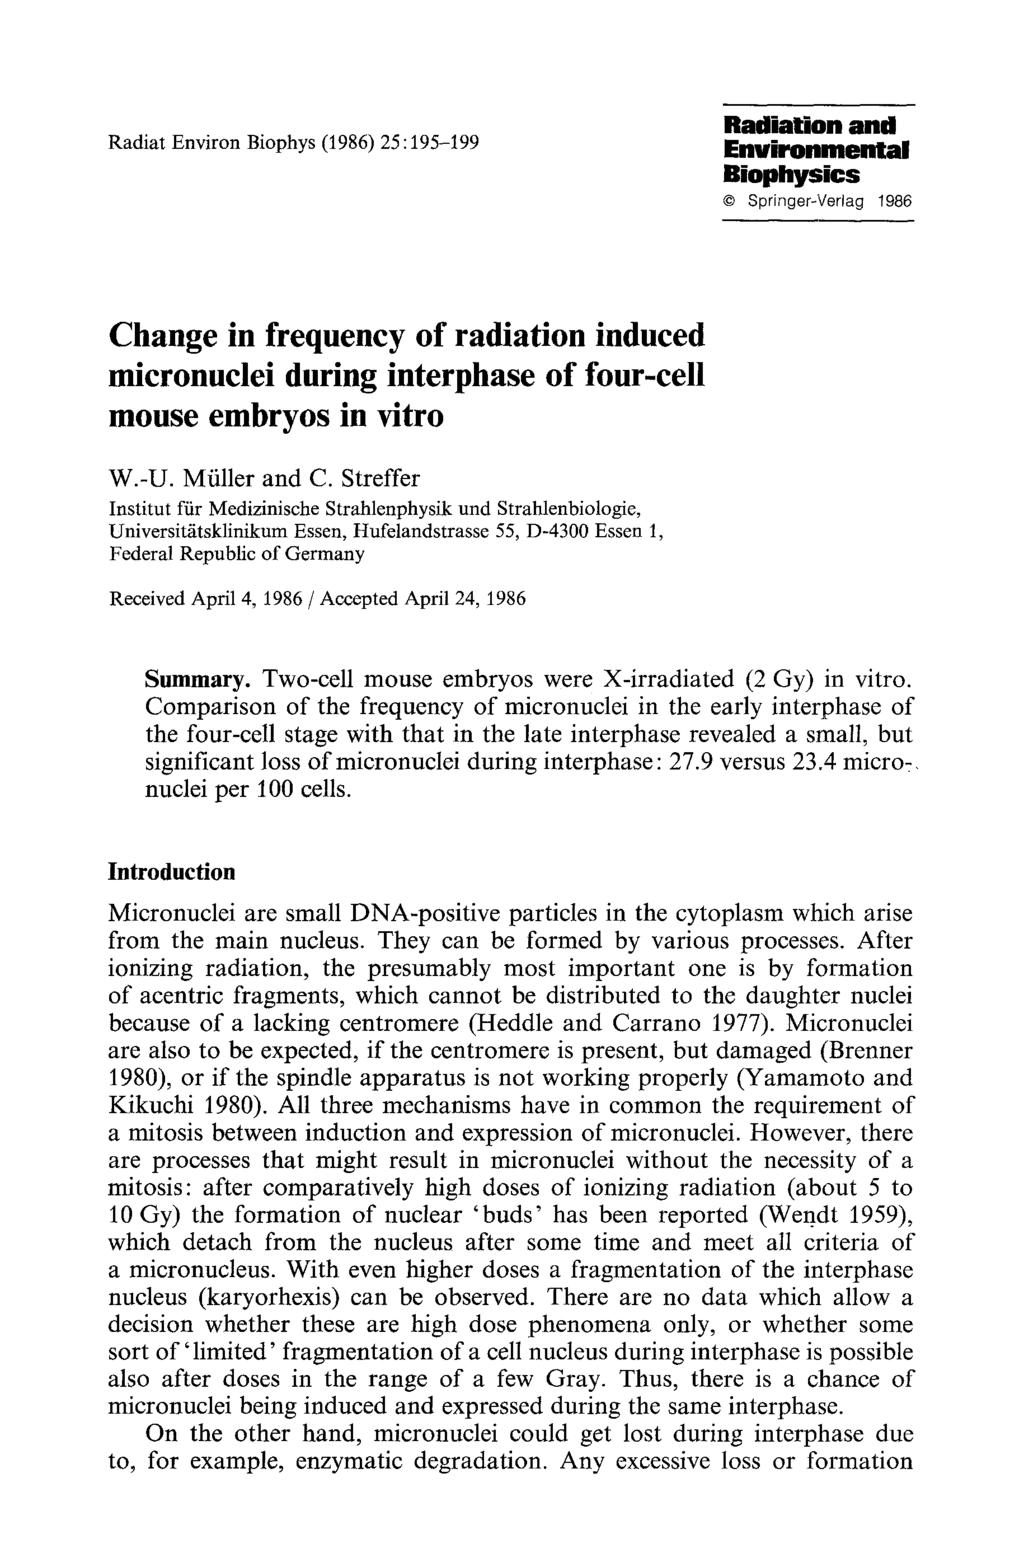 Radiat Environ Biophys (1986) 25:195-199 Radiation and Environmental Biophysics Springer-Verlag 1986 Change in frequency of radiation induced micronuclei during interphase of four-cell mouse embryos